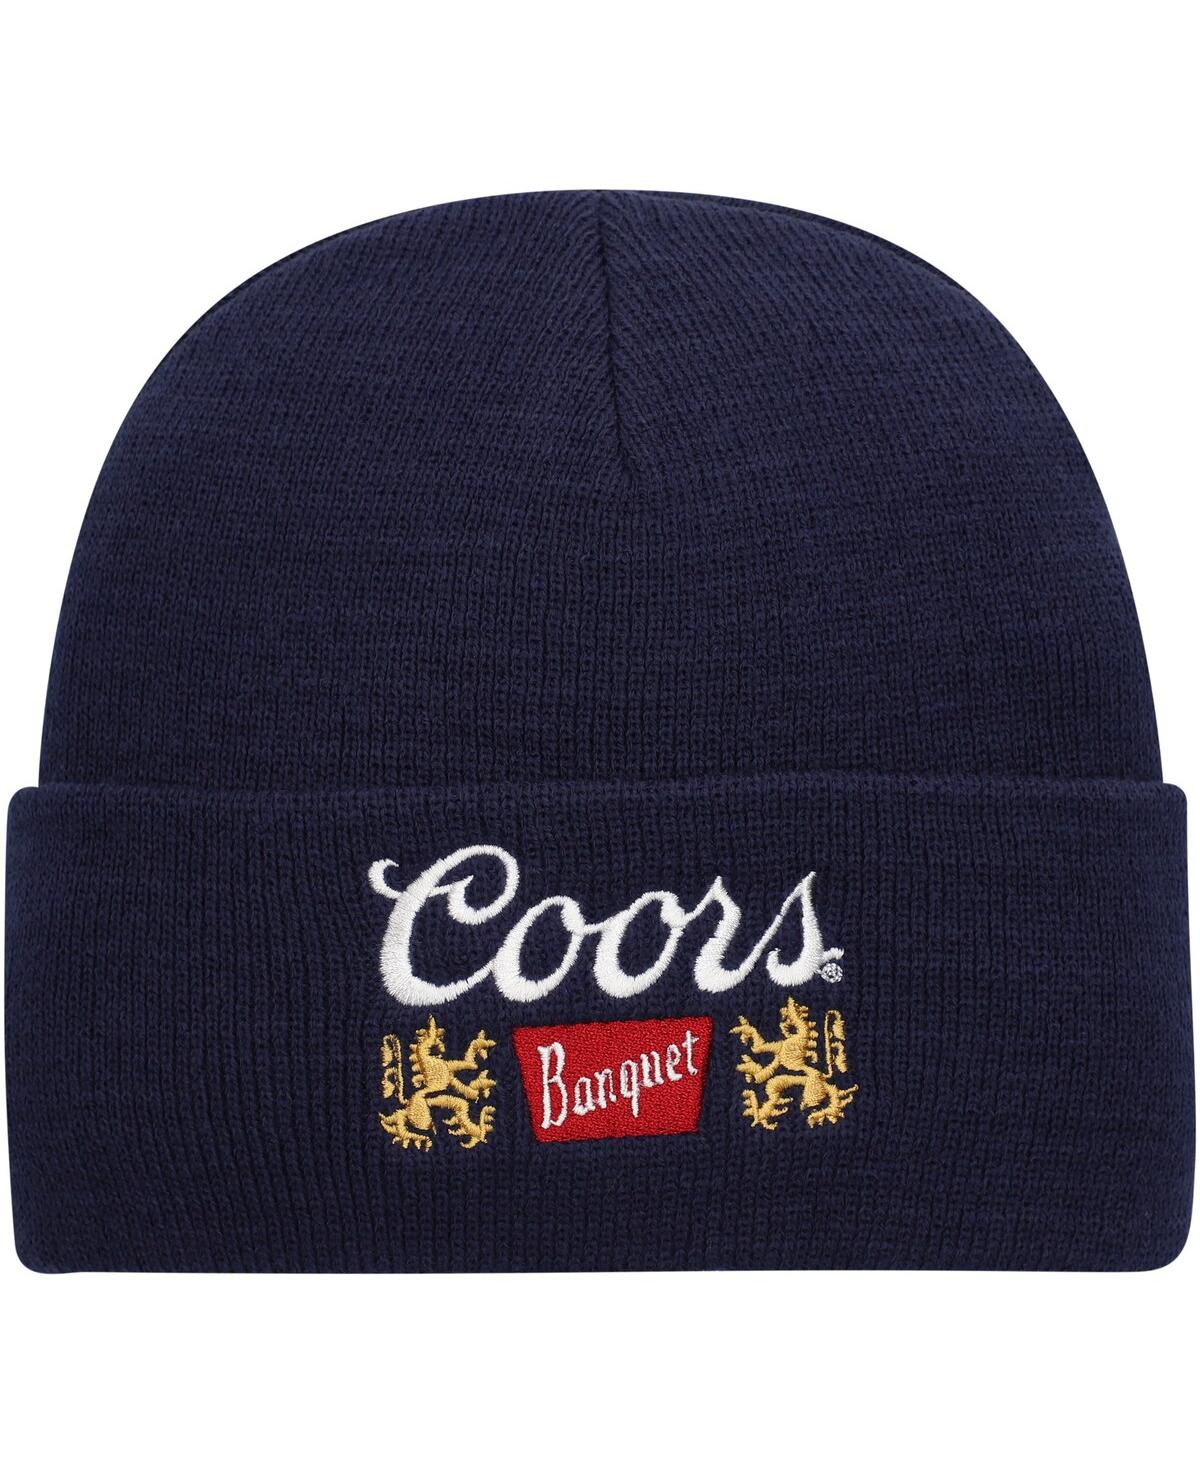 American Needle Men's  Navy Coors Banquet Cuffed Knit Hat